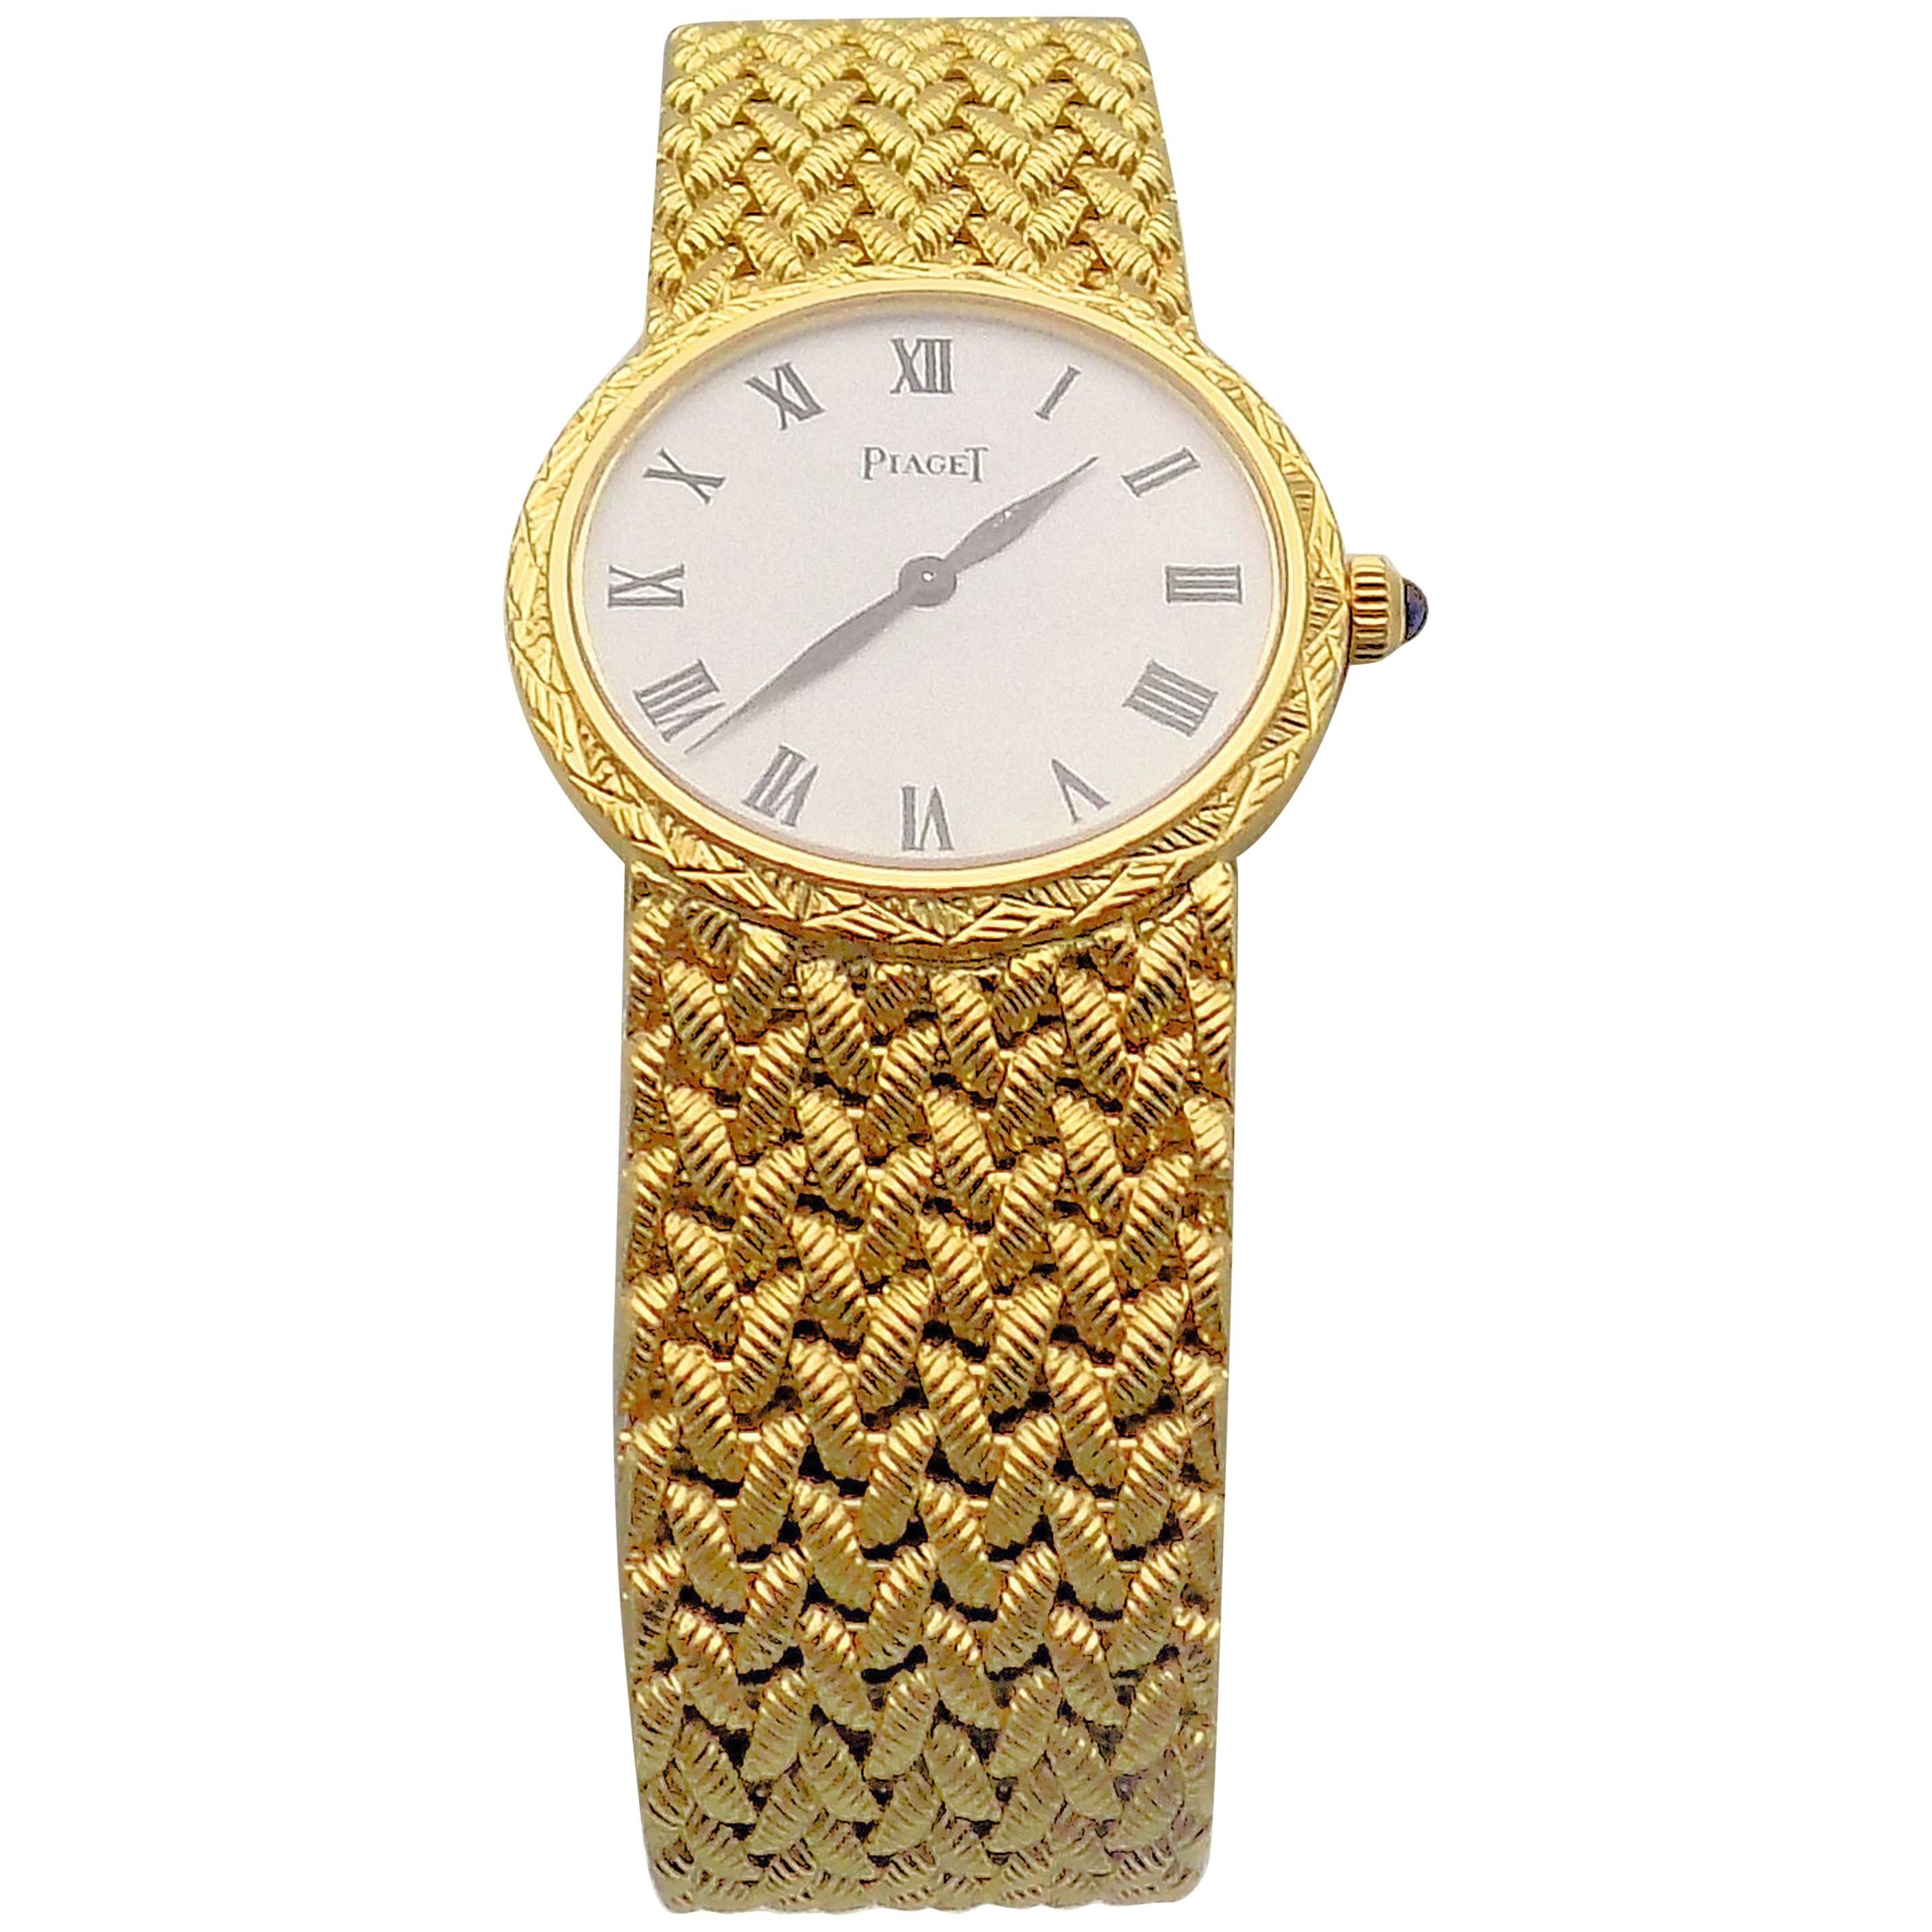 Gold Piaget Wrist Watch For Sale